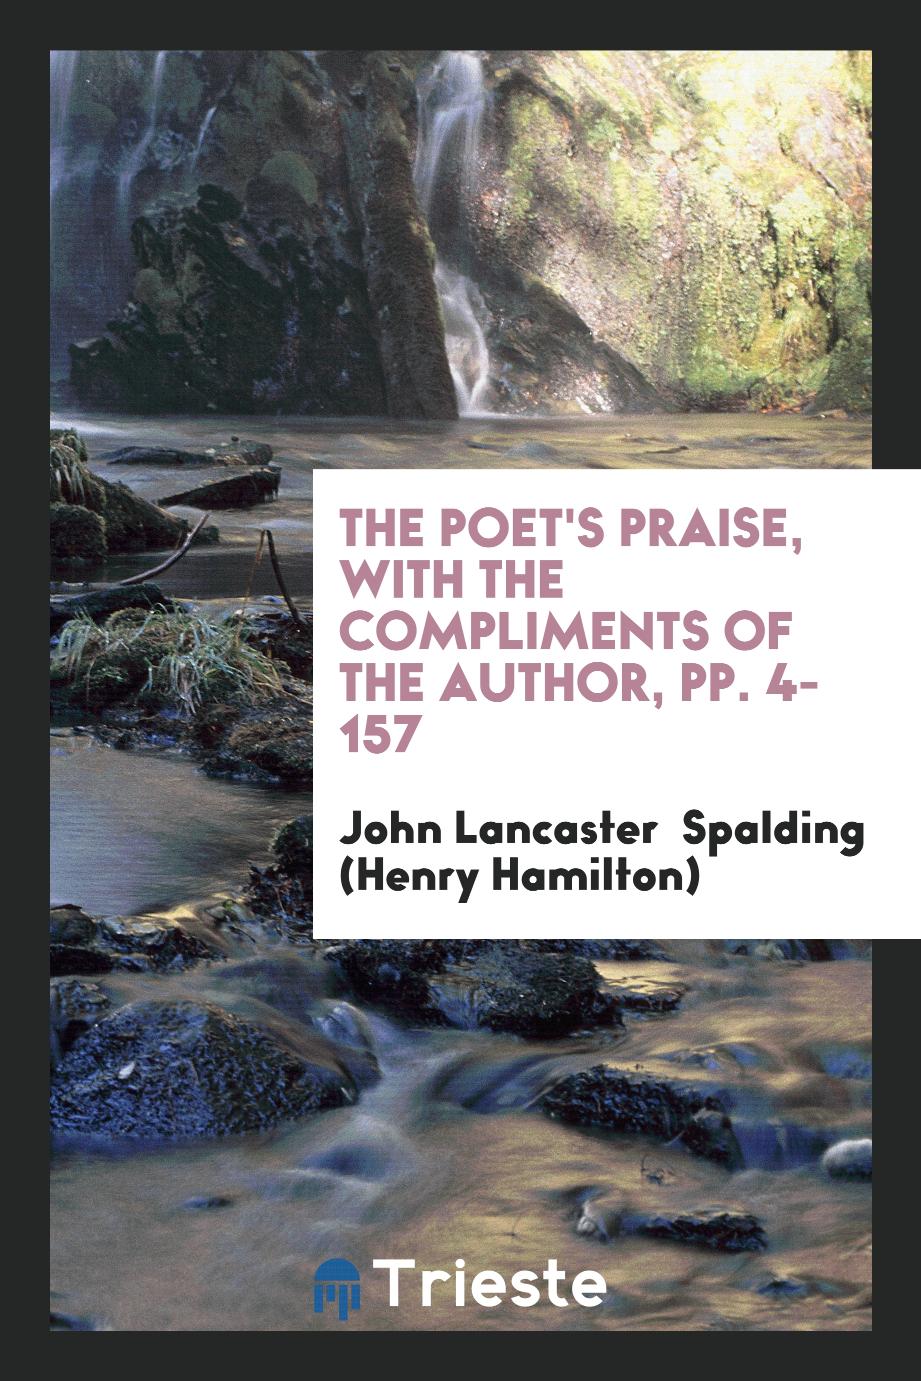 The Poet's Praise, with the Compliments of the Author, pp. 4-157